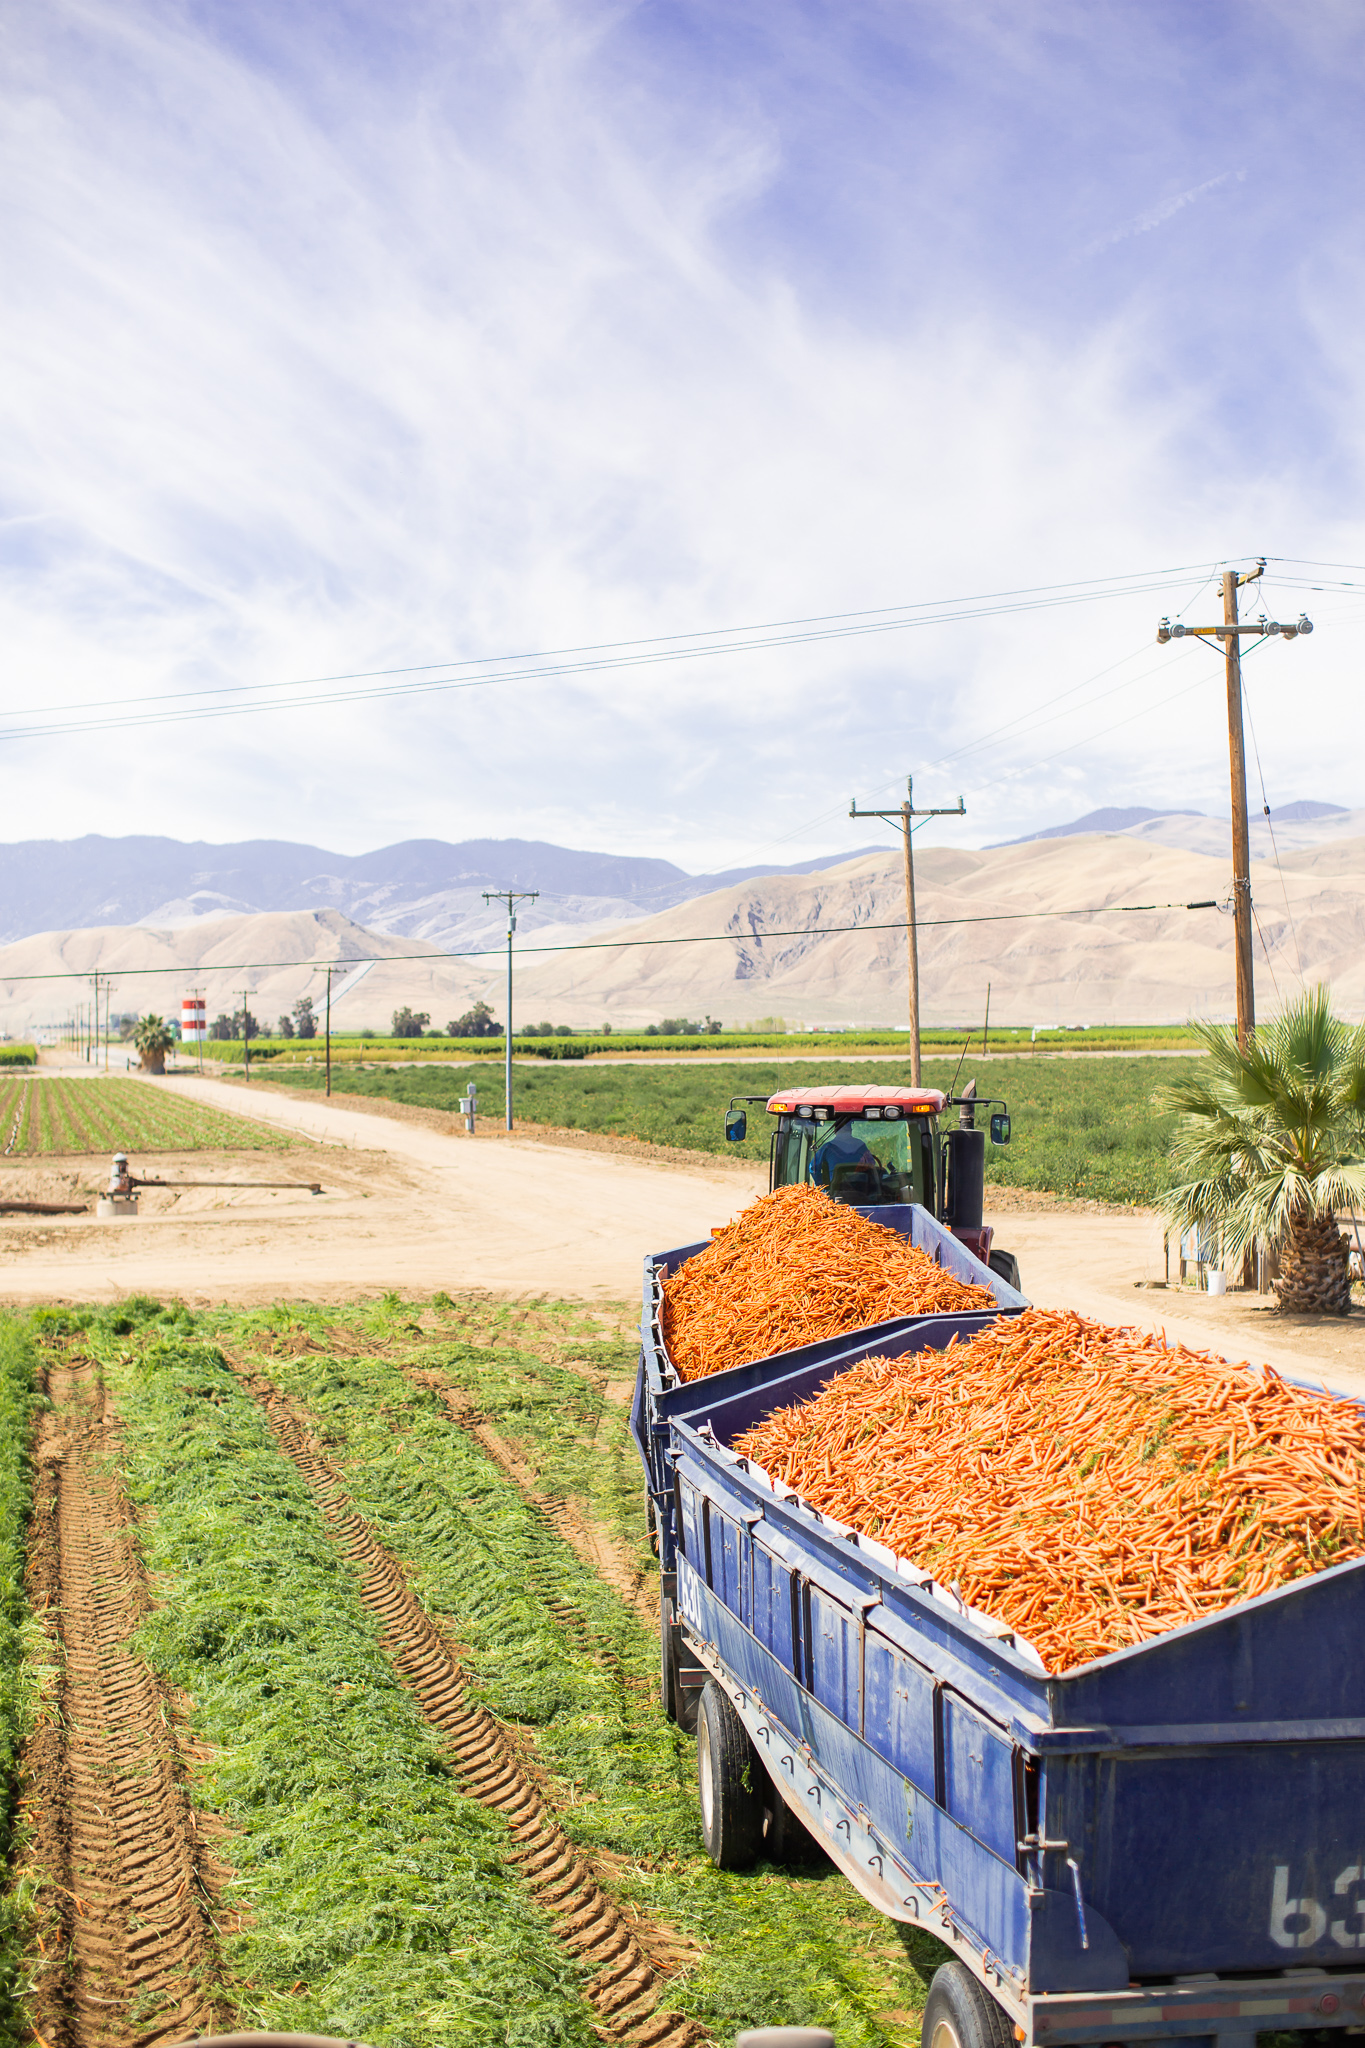 Bolthouse Farms Bakersfield Visit – Our California Trip Recap by popular North Carolina lifestyle blog, Coffee Beans and Bobby Pins: image of a tractor pulling trailers full of carrots at Bolthouse Farms in Bakersfield, California.